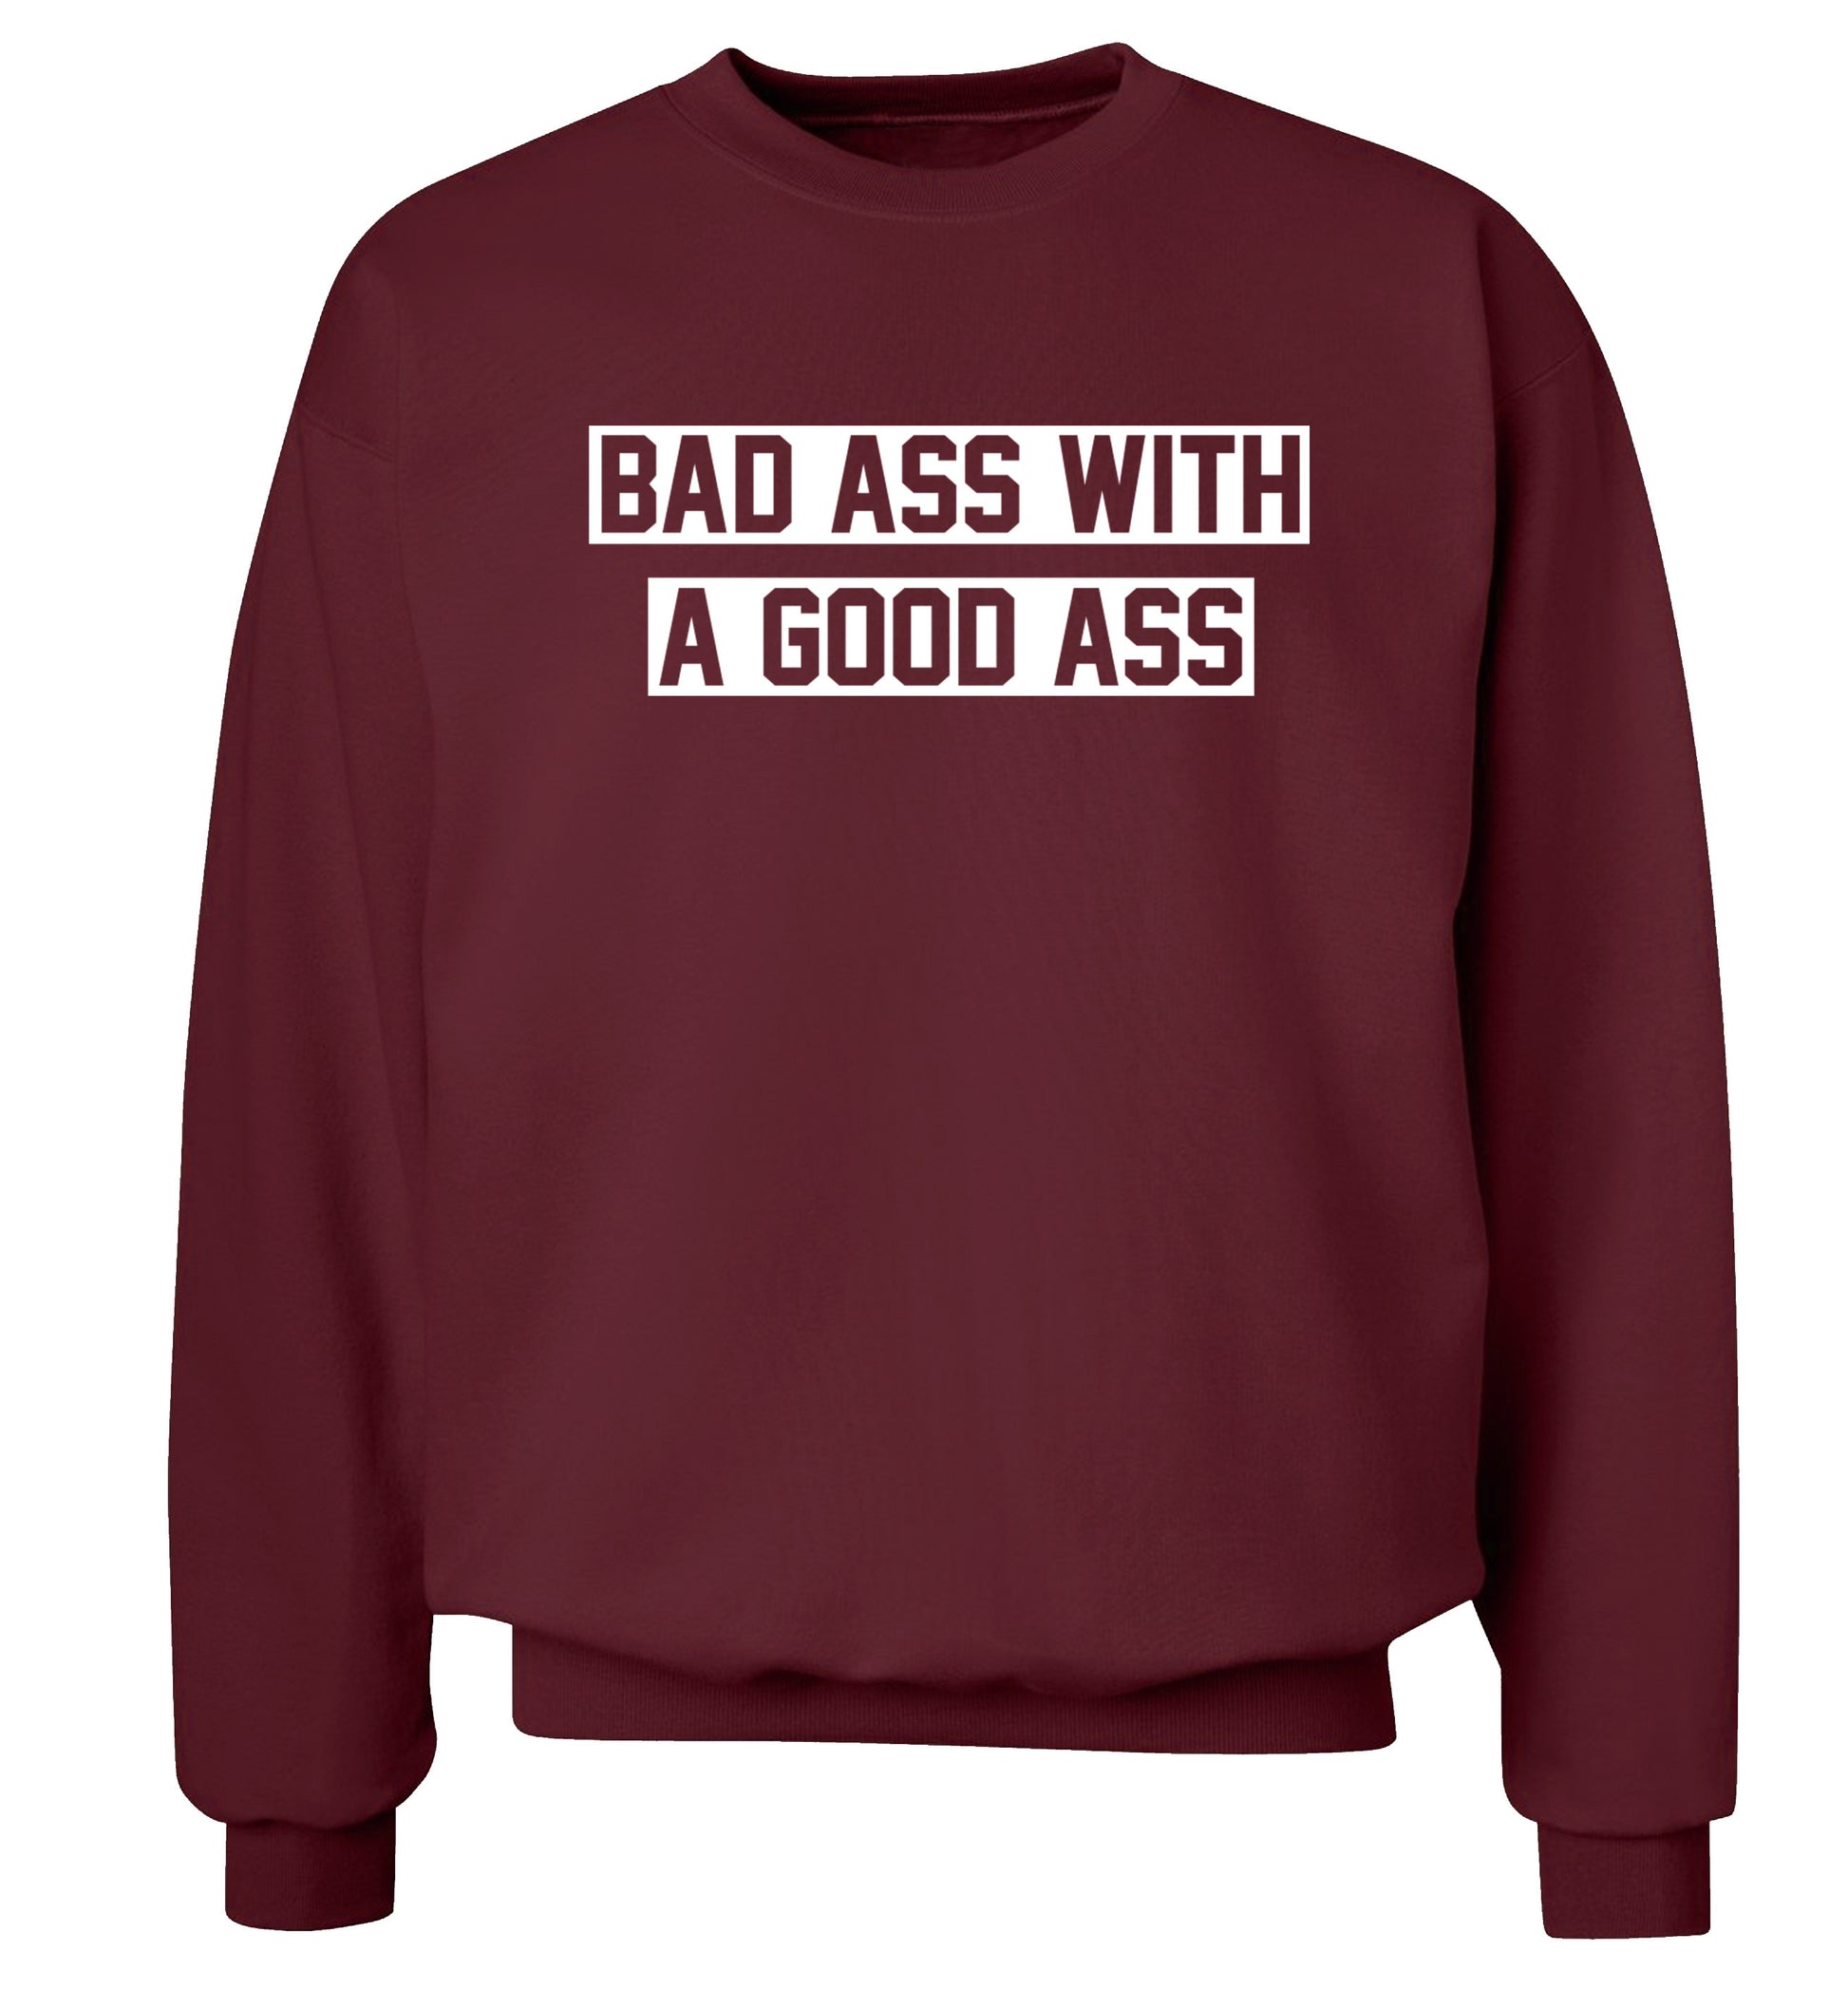 A bad ass with a good ass Adult's unisex maroon Sweater 2XL